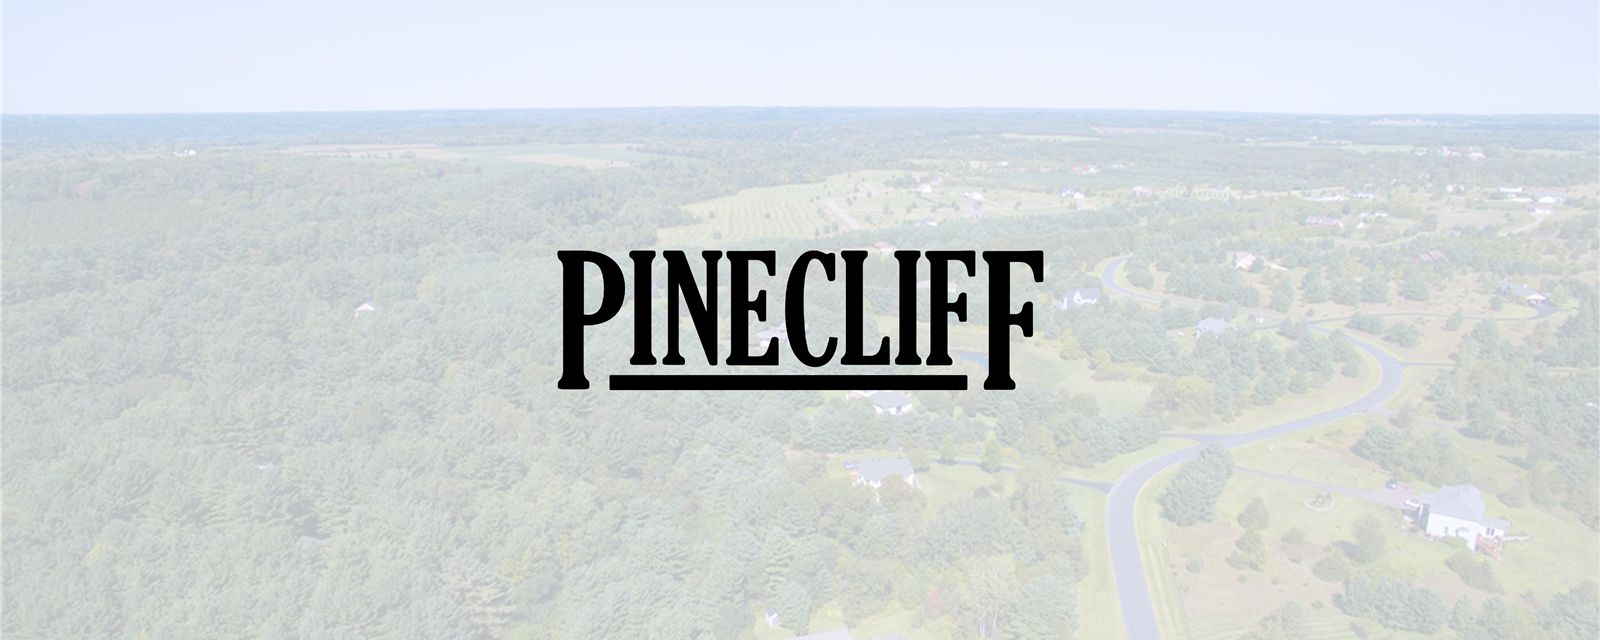 Pinecliff,54025